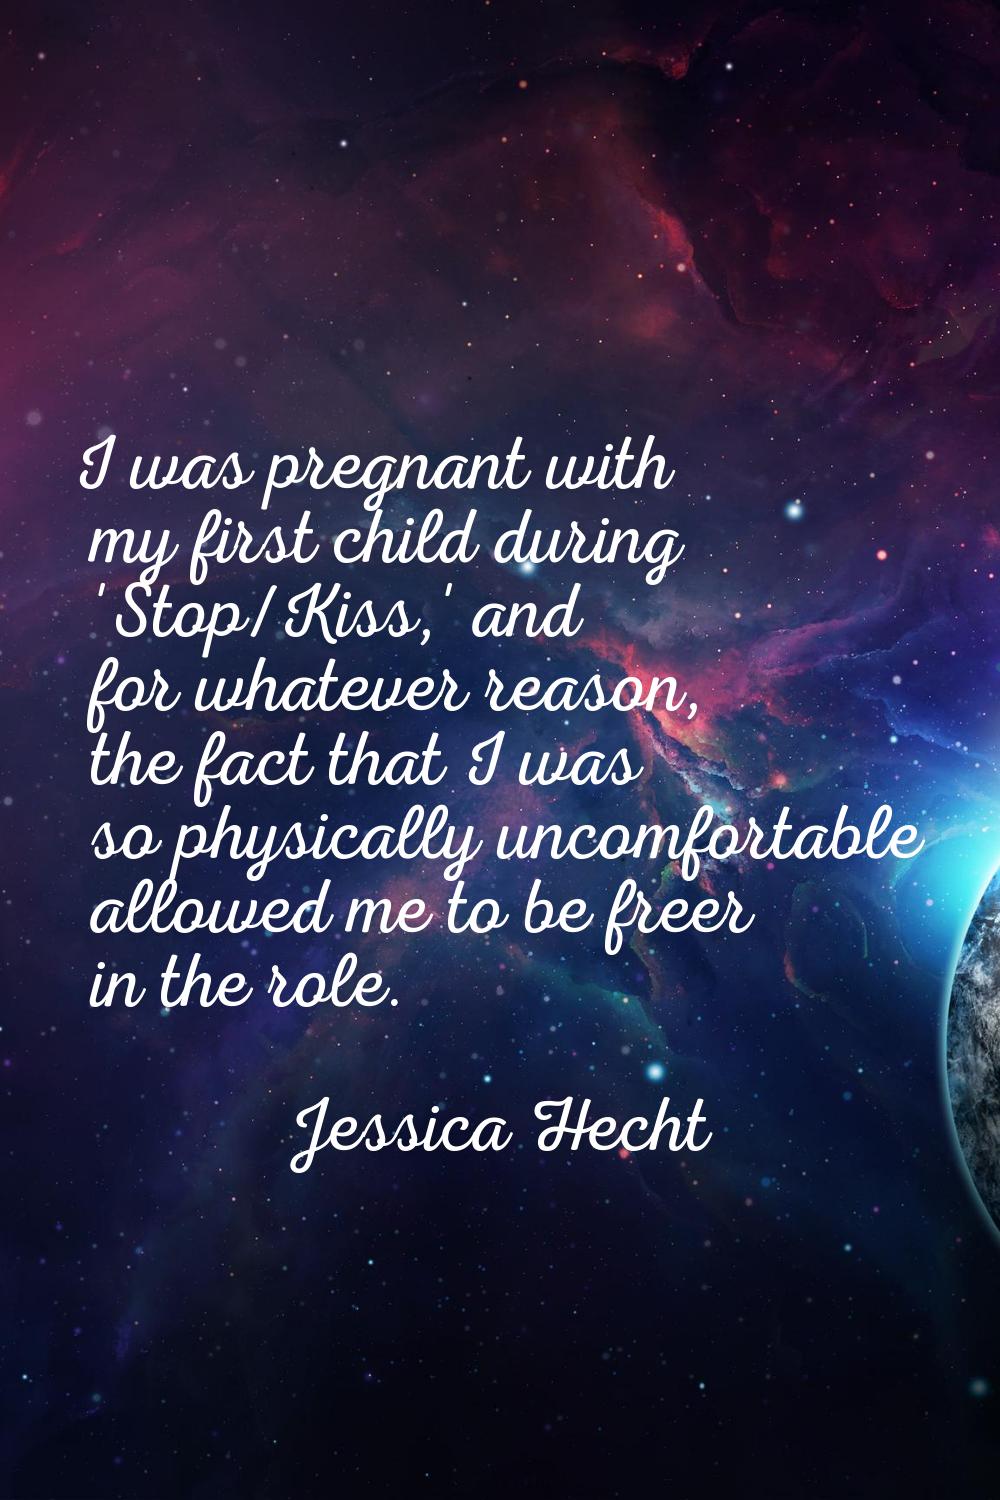 I was pregnant with my first child during 'Stop/Kiss,' and for whatever reason, the fact that I was